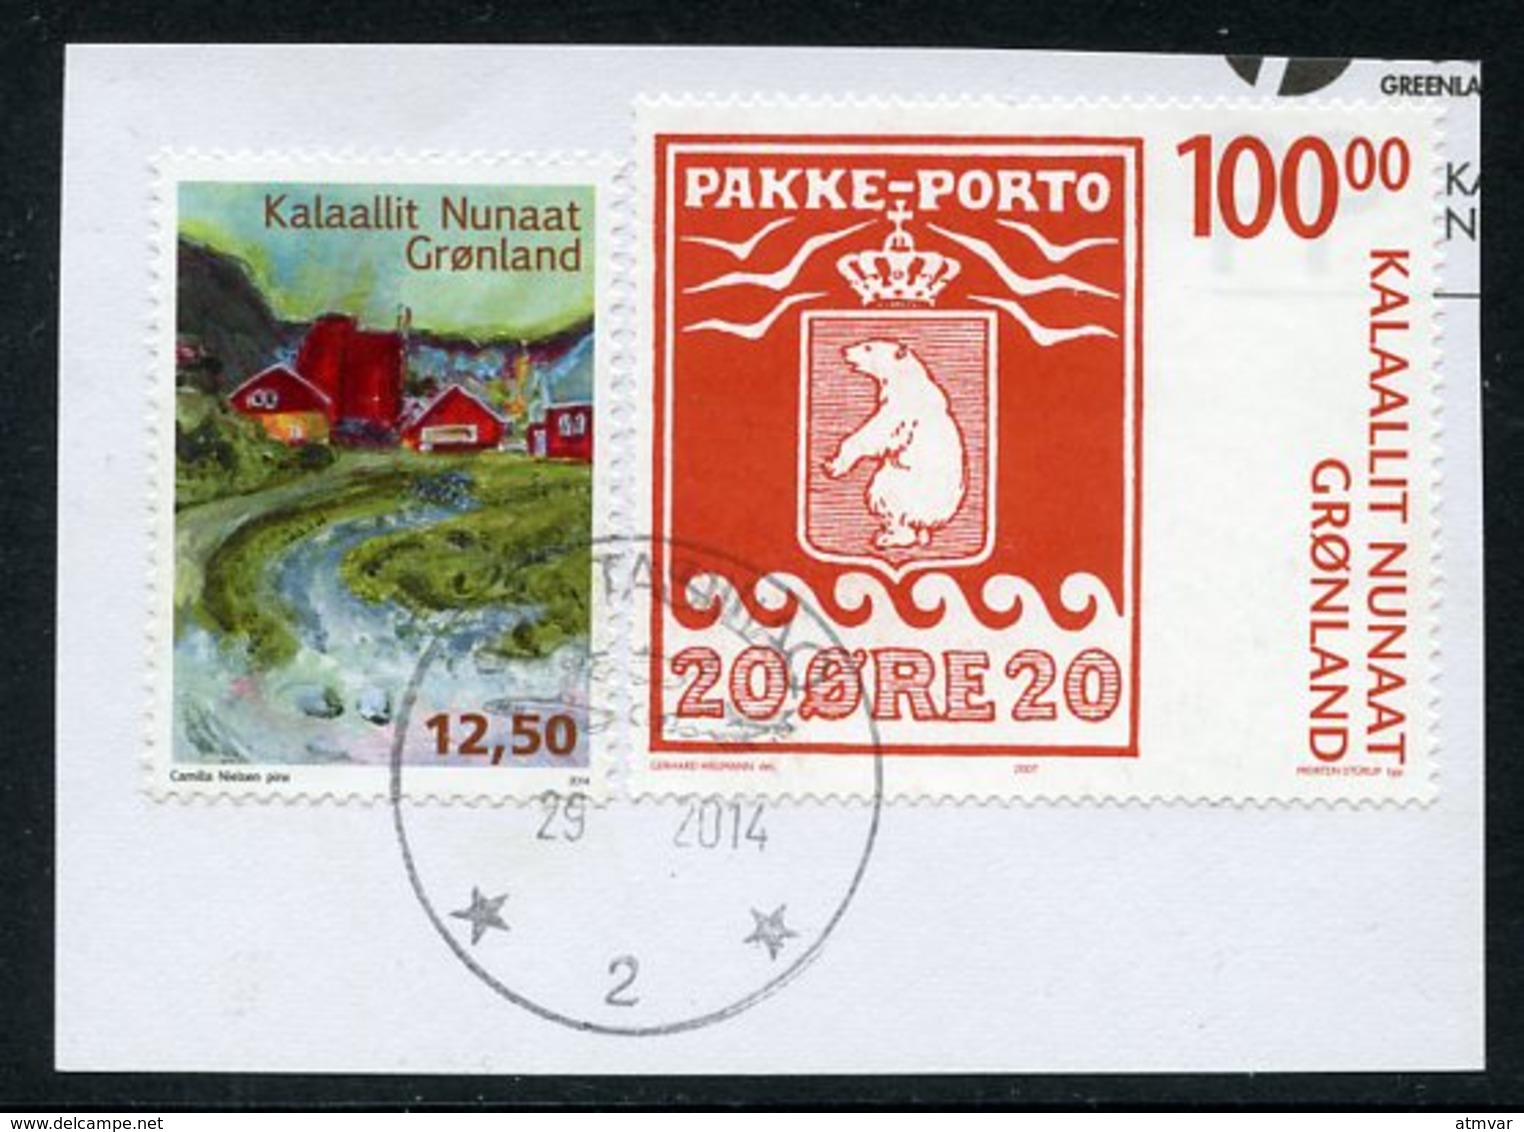 GREENLAND / GROENLAND (2007 + 2014) - PAKKE-PORTO 100 KR. + Greenlandic Songs - USED STAMPS - Used Stamps